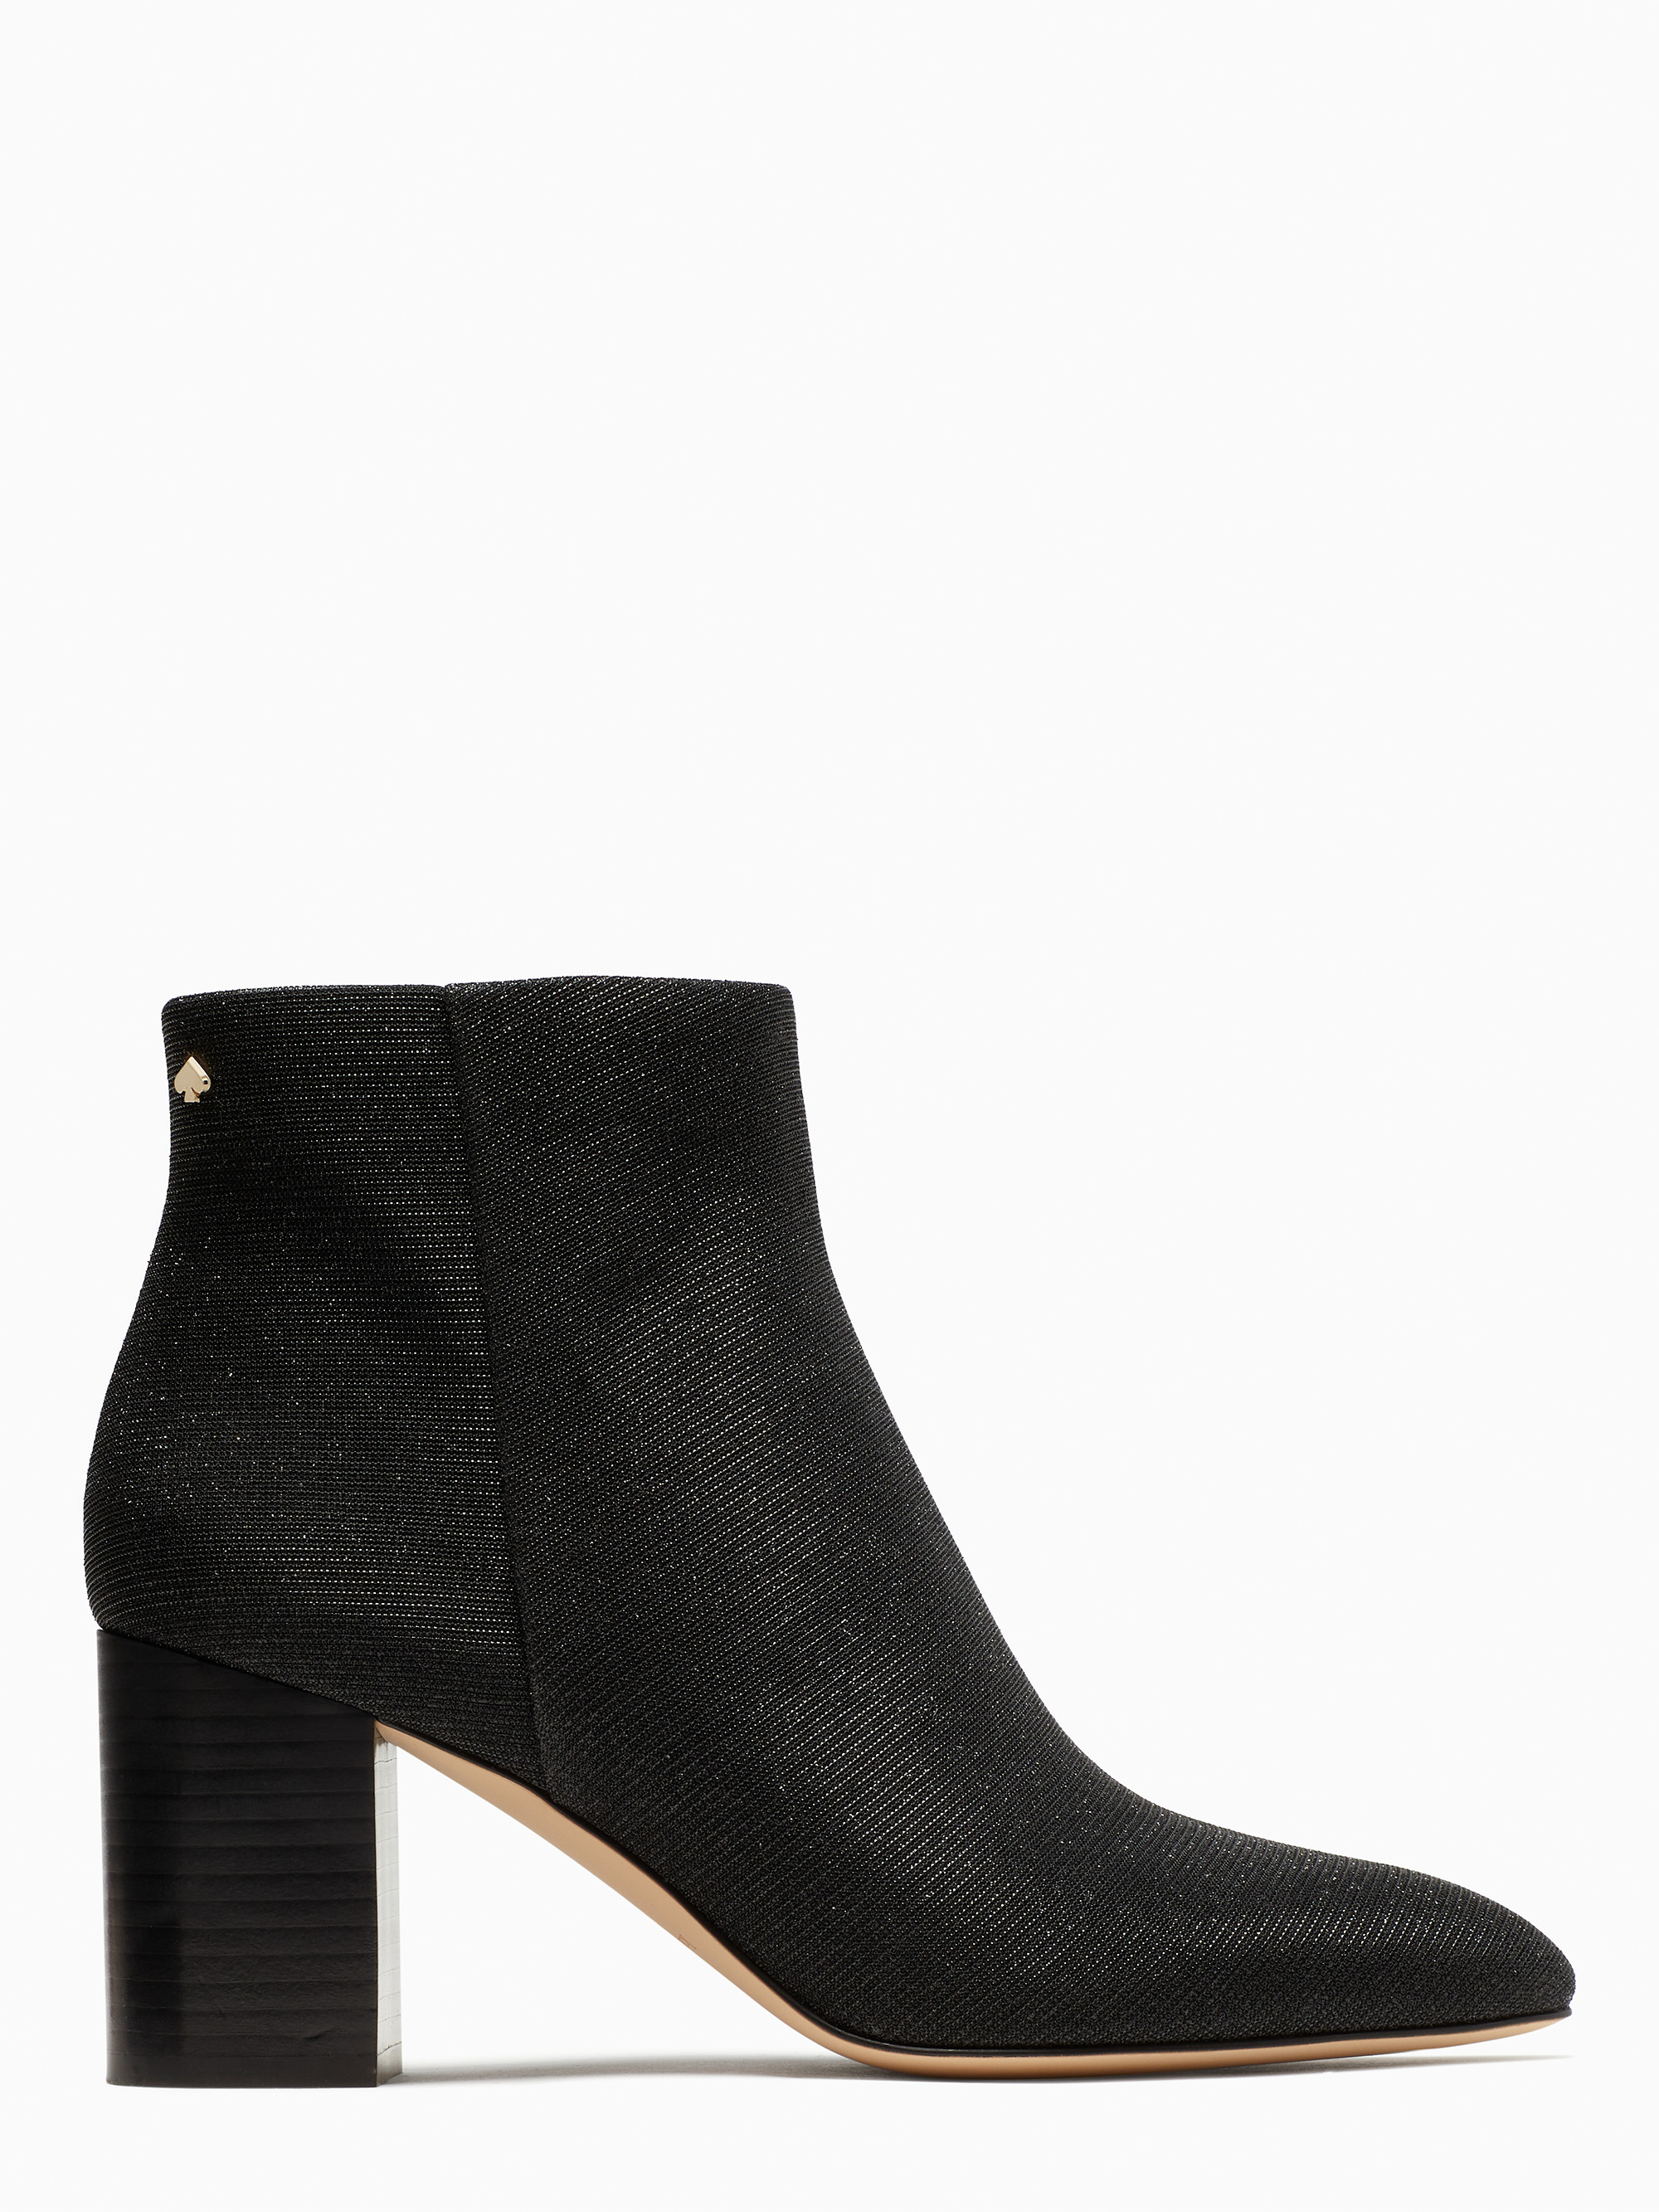 Kate Spade Giselle Booties